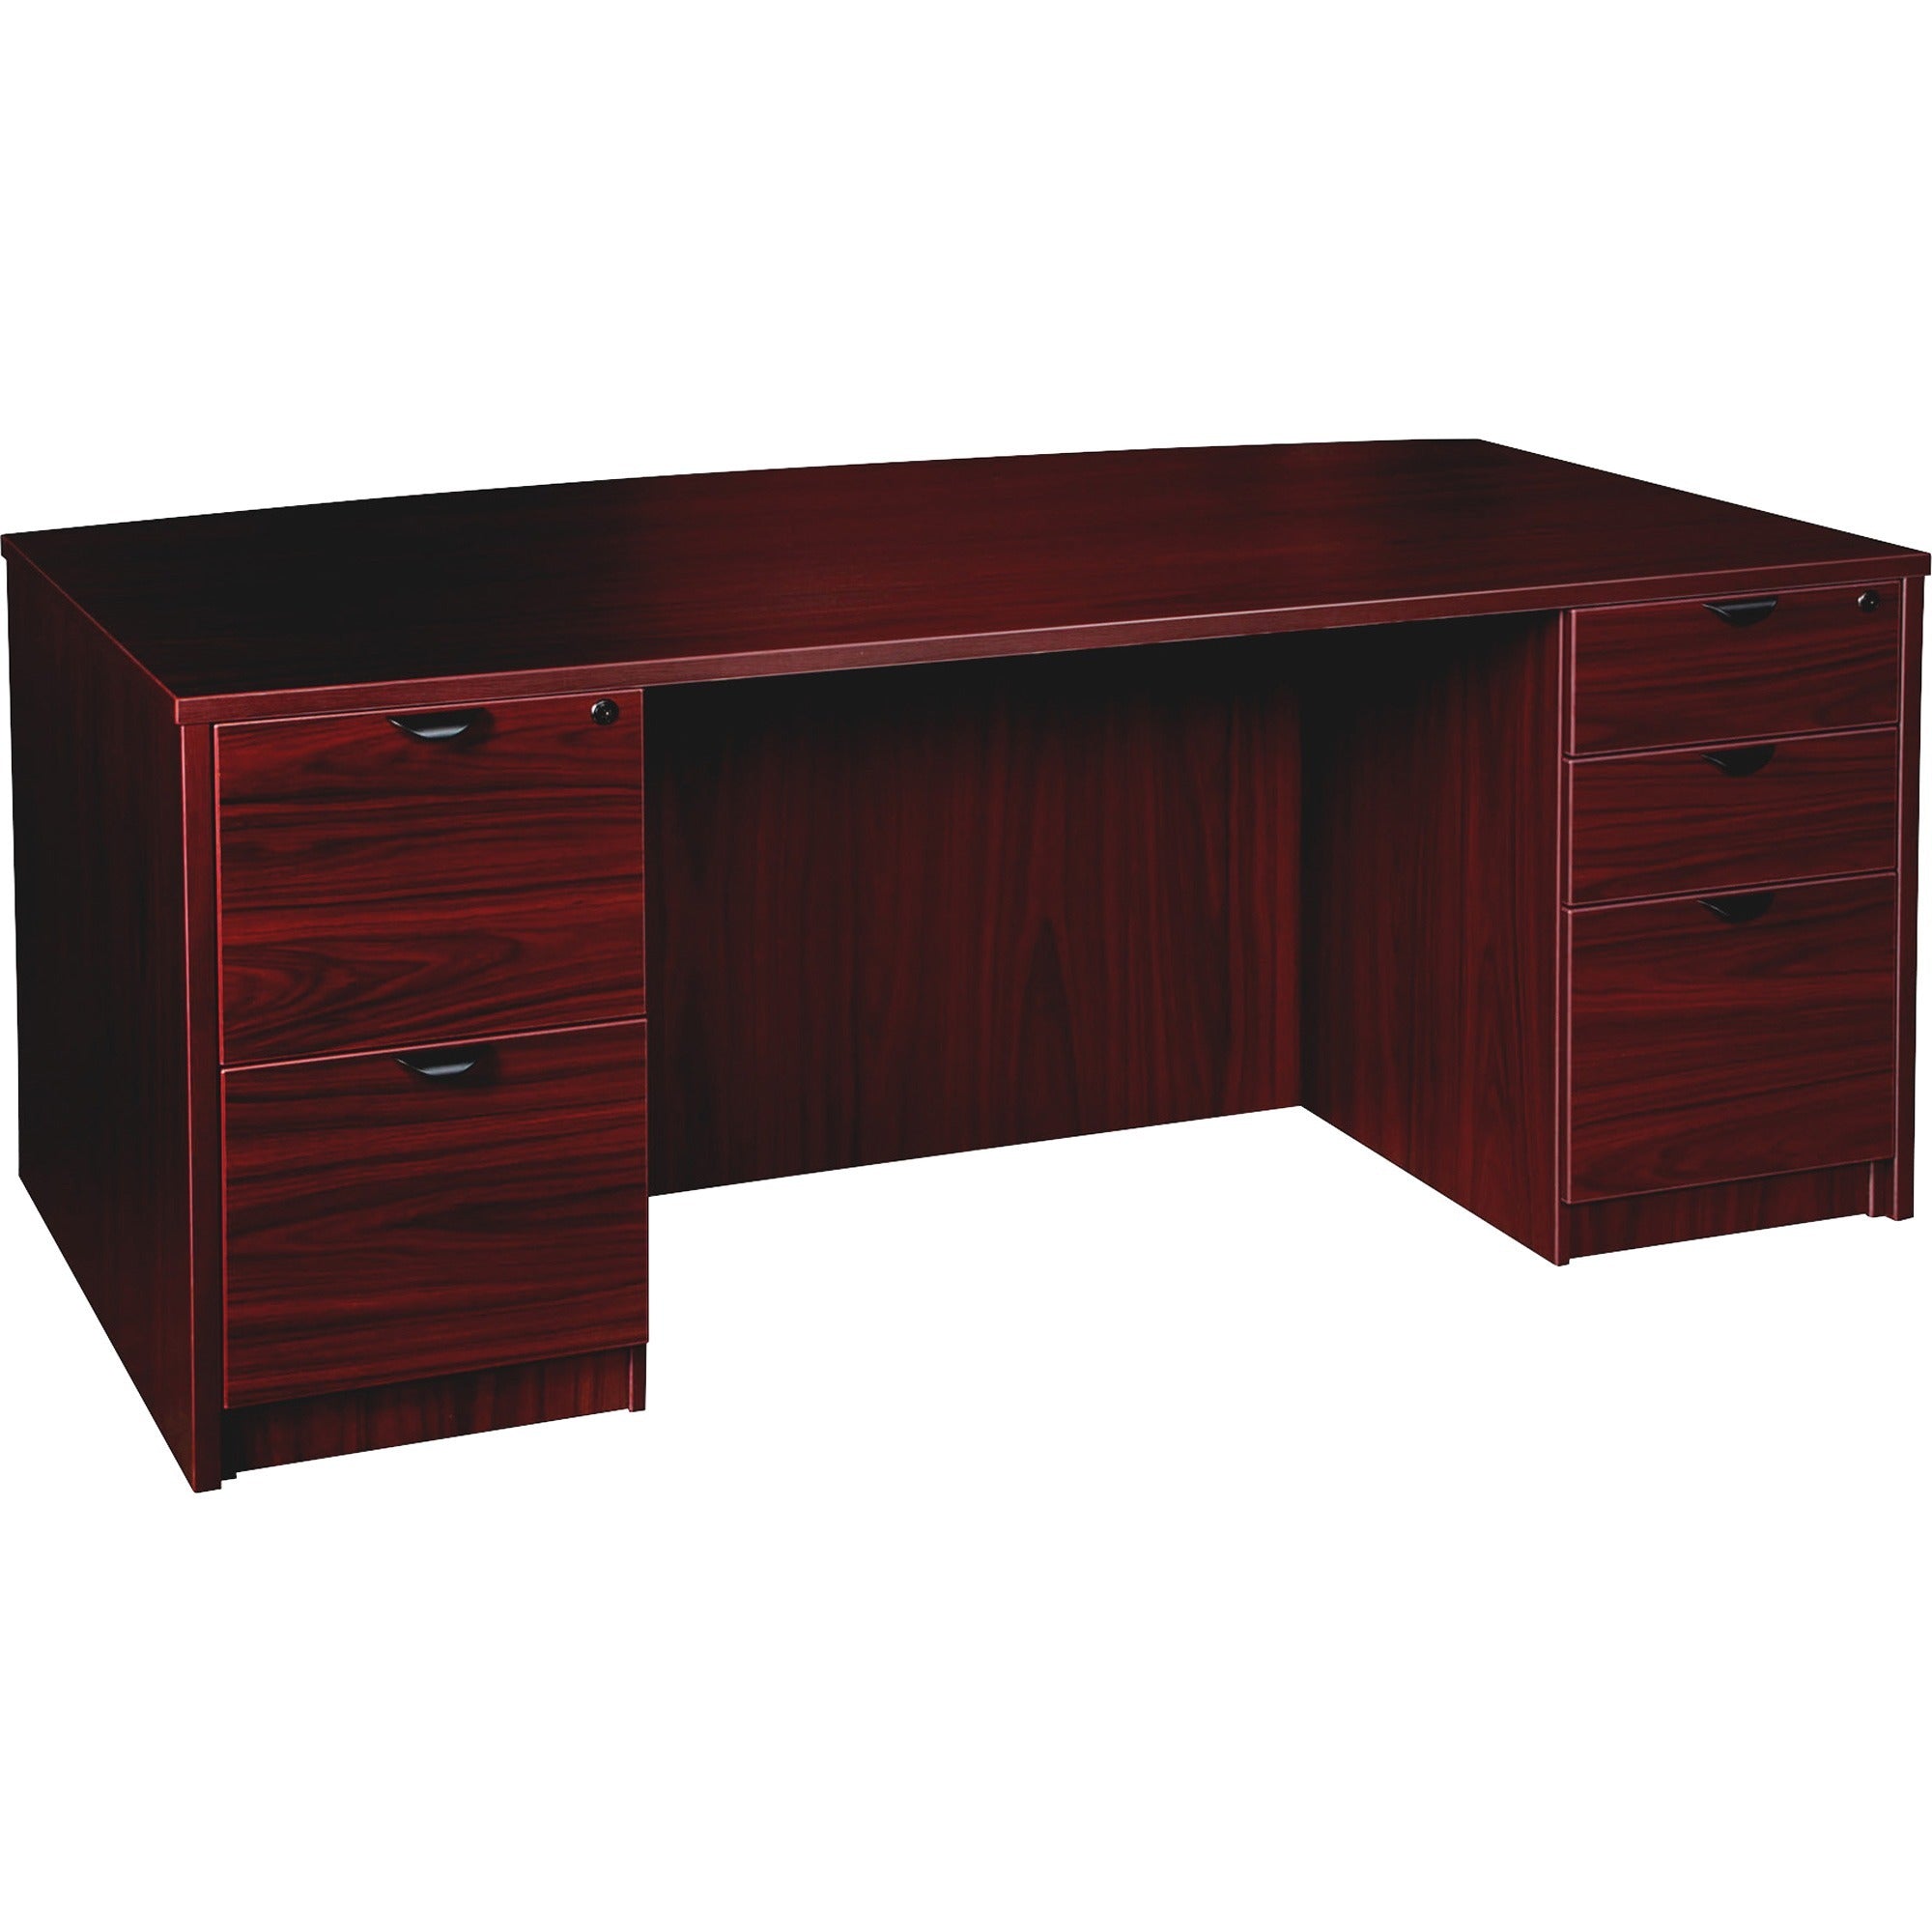 lorell-prominence-20-bowfront-double-pedestal-desk-1-top-72-x-4229-5-x-file-box-drawers-double-pedestal-band-edge-material-particleboard-finish-mahogany-laminate-thermofused-melamine-tfm_llrpd4272dpmy - 1